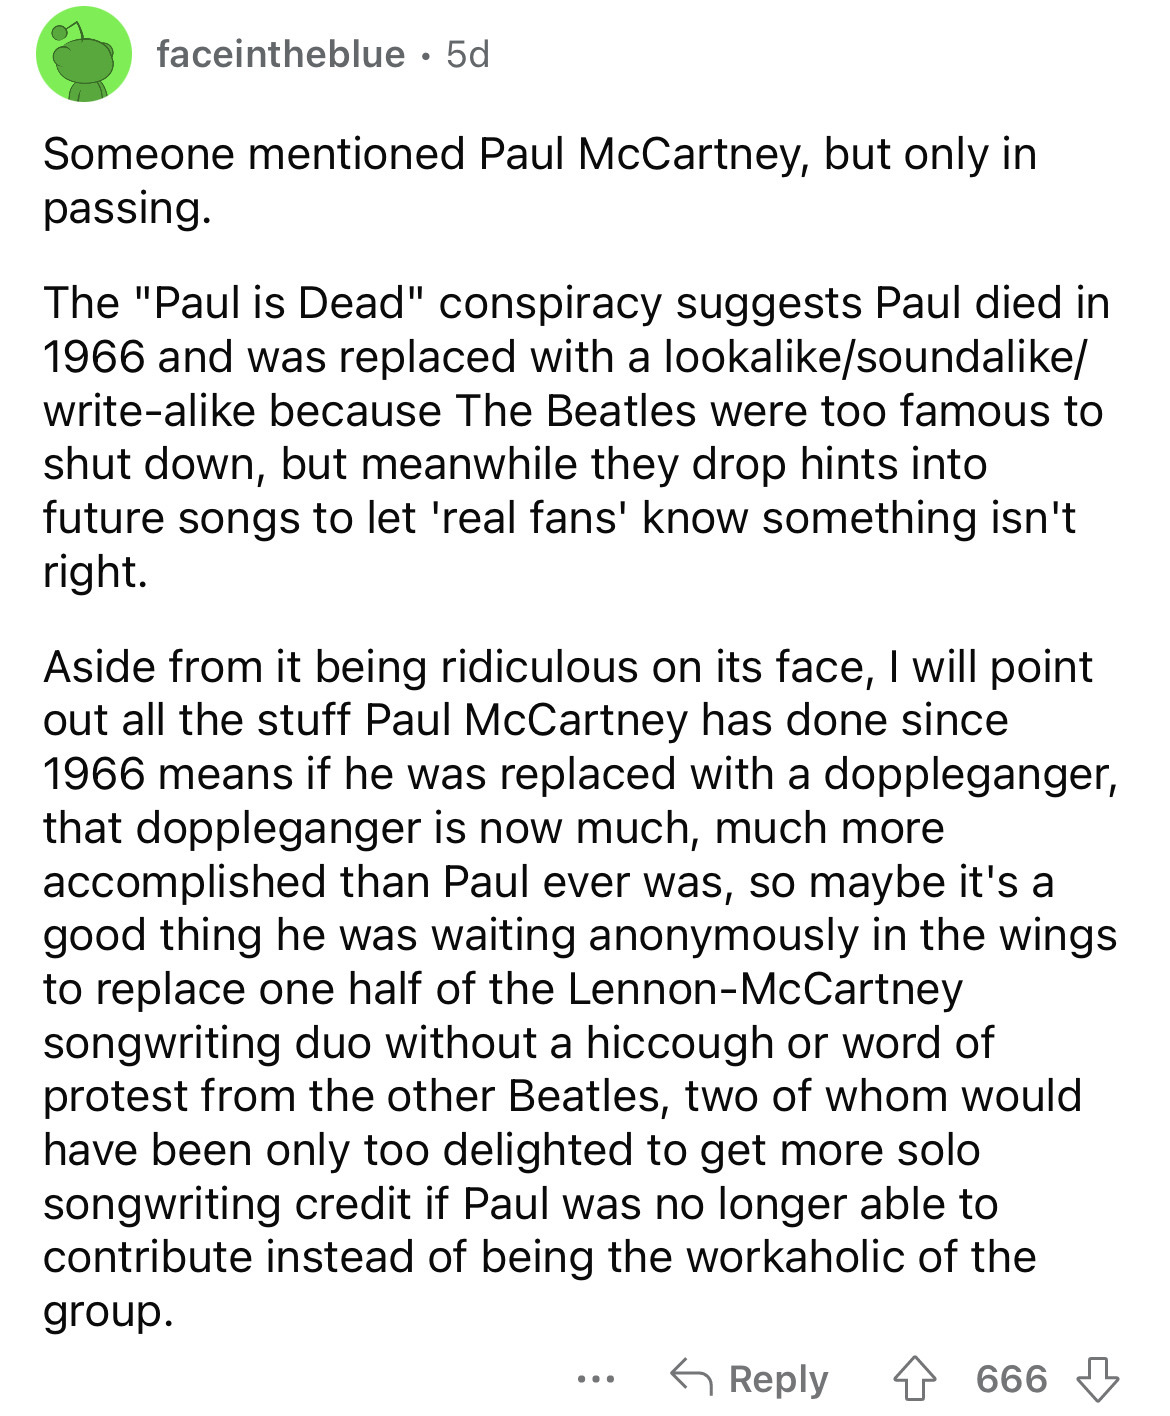 document - faceintheblue 5d Someone mentioned Paul McCartney, but only in passing. The "Paul is Dead" conspiracy suggests Paul died in 1966 and was replaced with a lookaounda writea because The Beatles were too famous to shut down, but meanwhile they drop